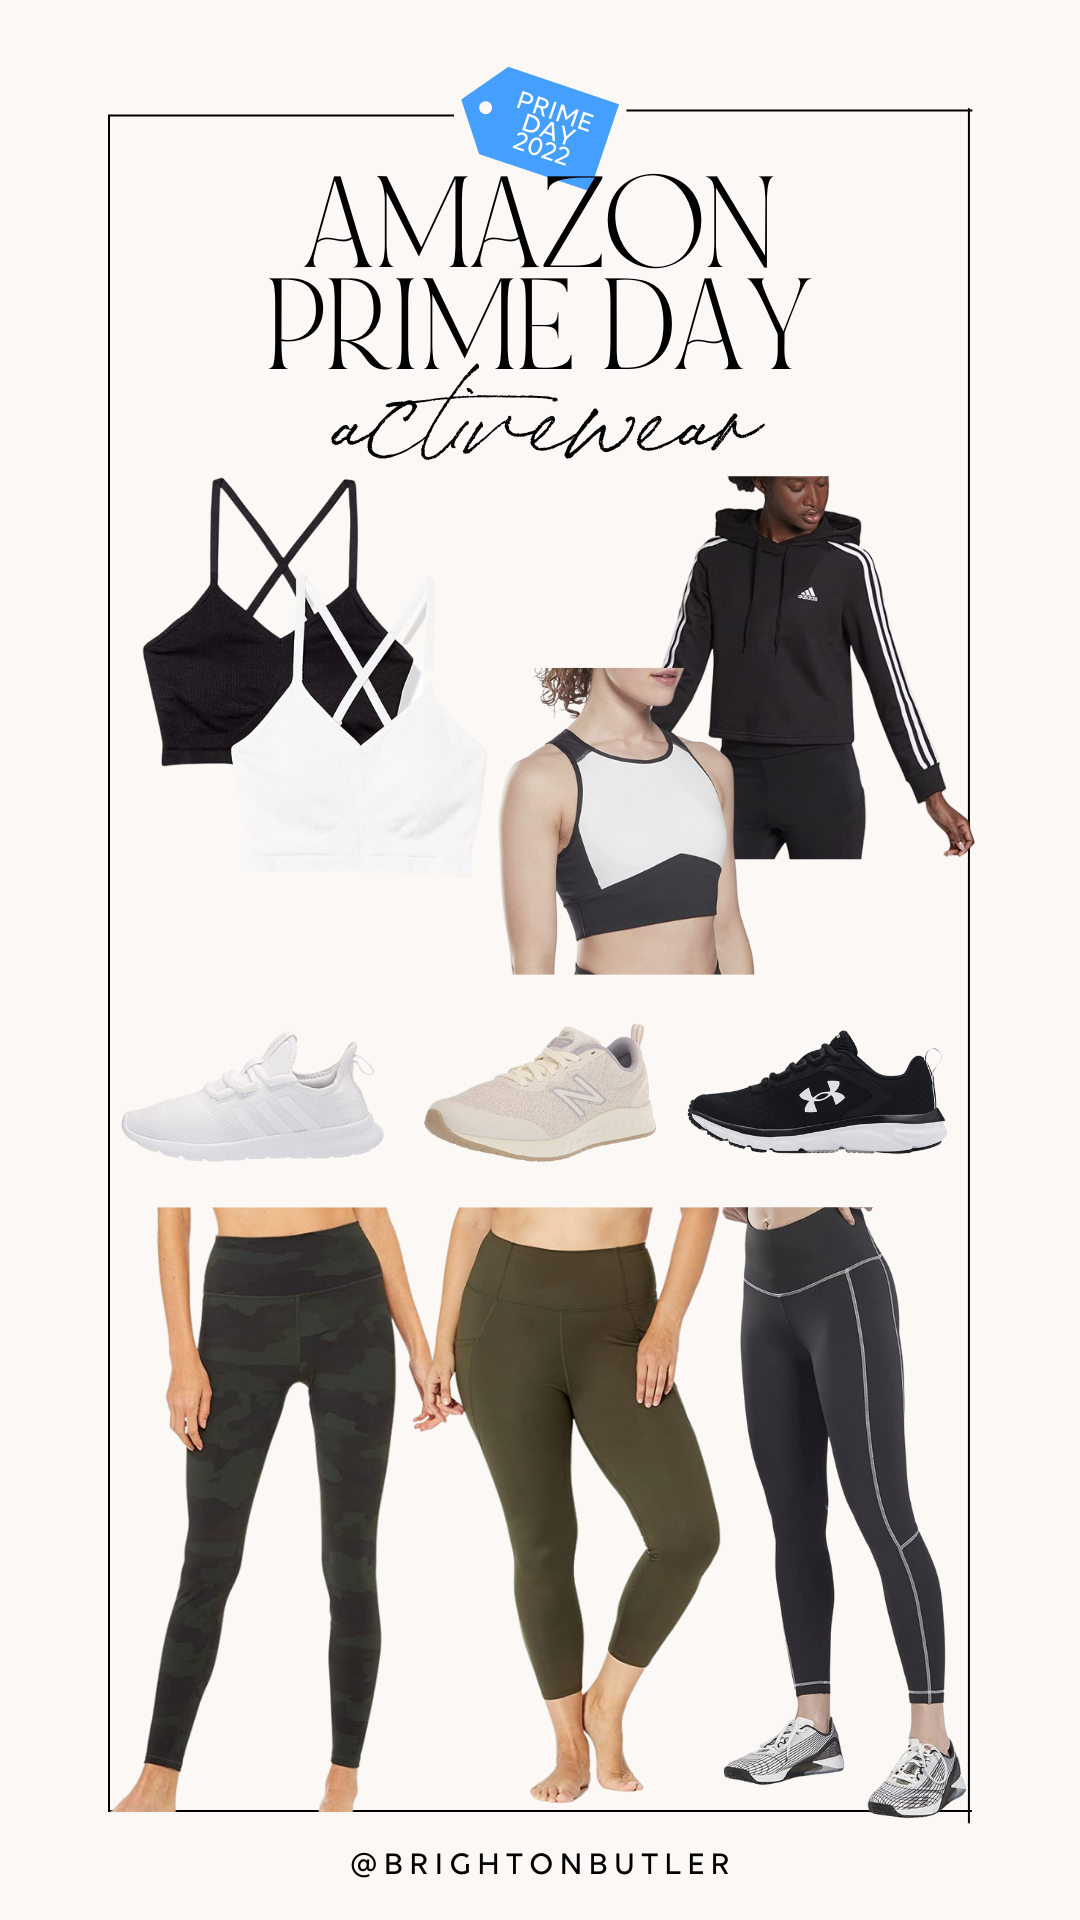 https://www.brightontheday.com/wp-content/uploads/2022/07/AMAZON-PRIME-DAY-2022-ACTIVEWEAR.png